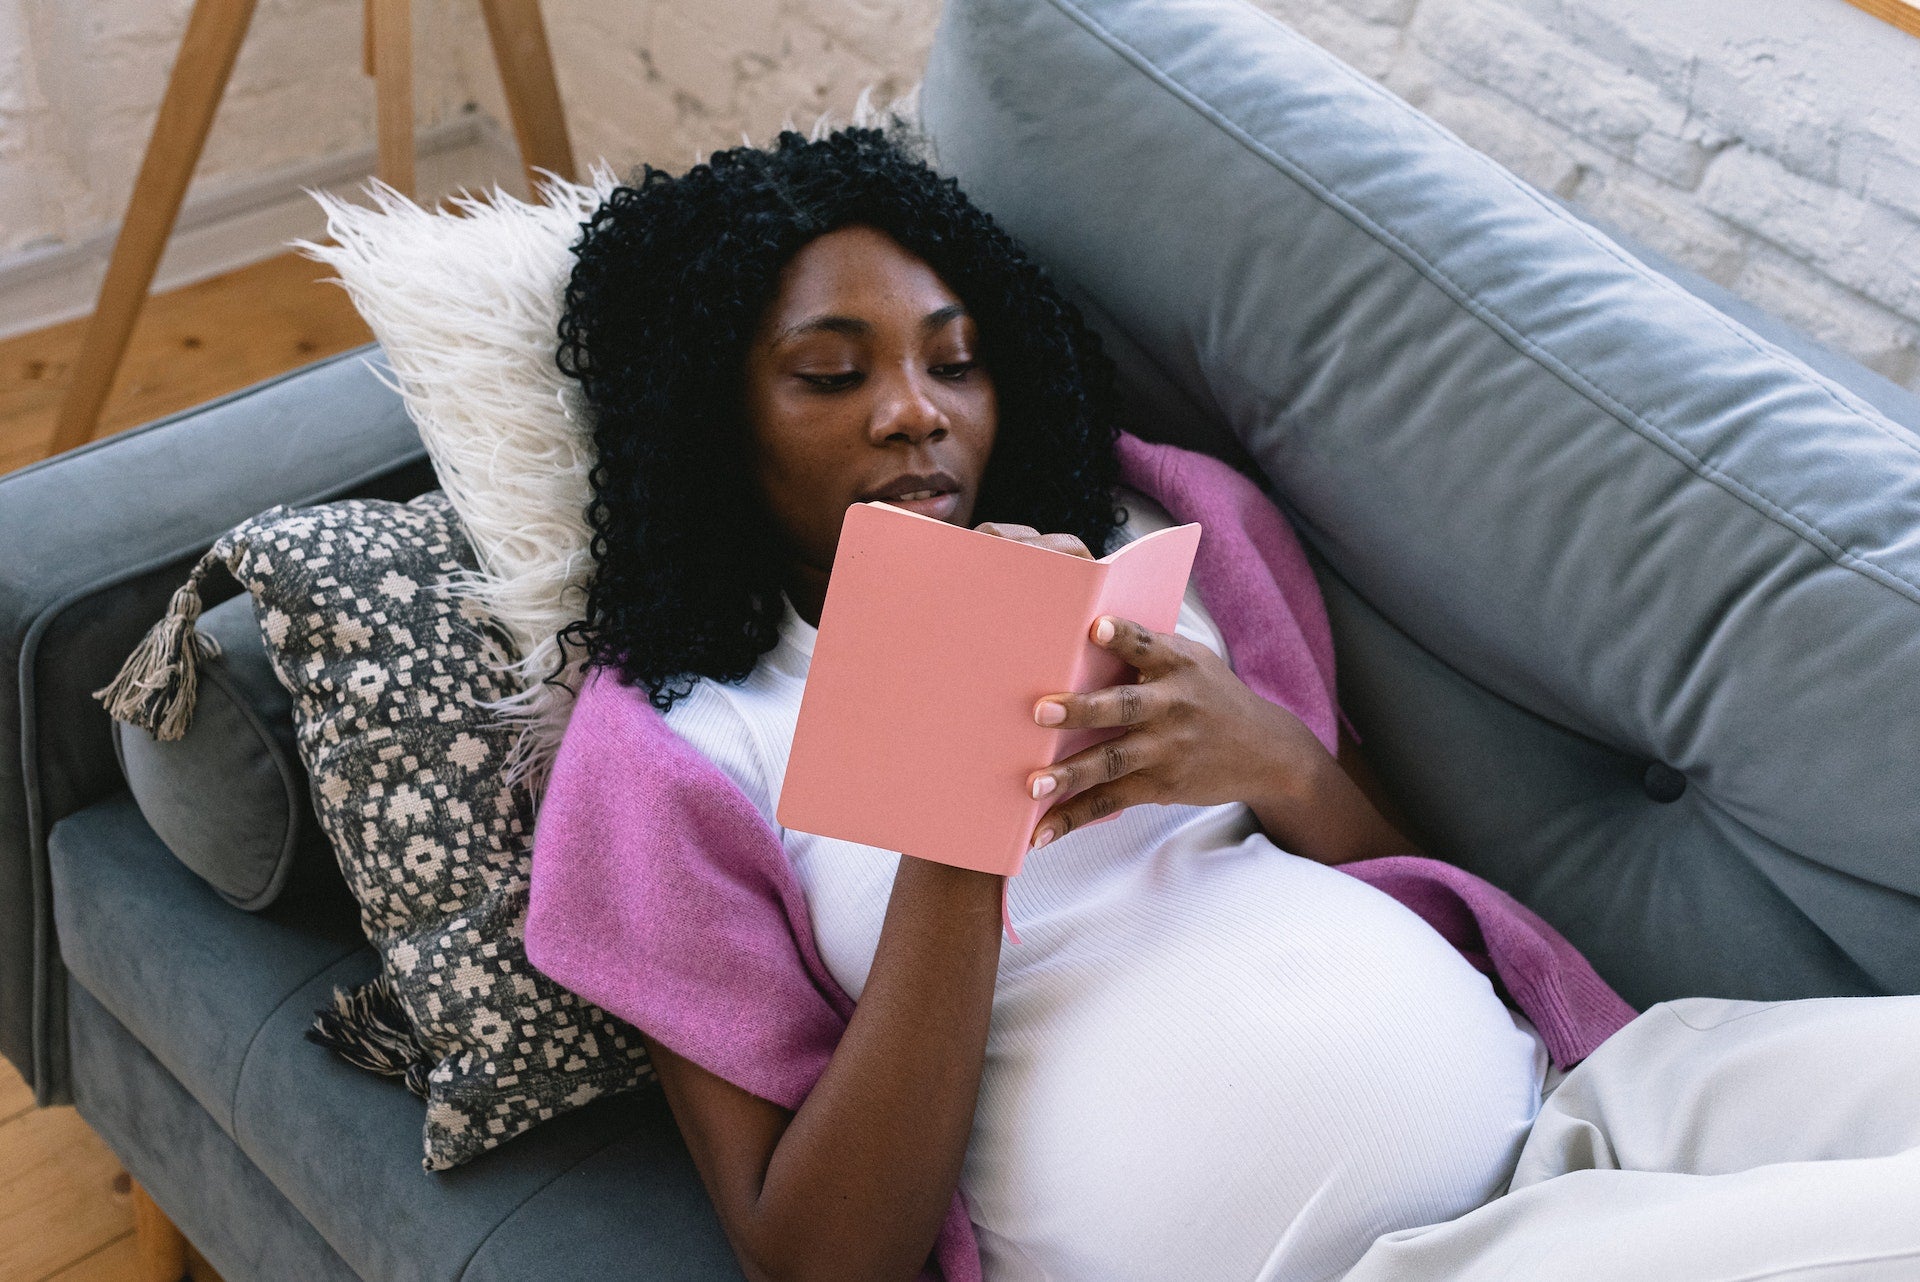 Pregnant woman lays on couch writing in a journal